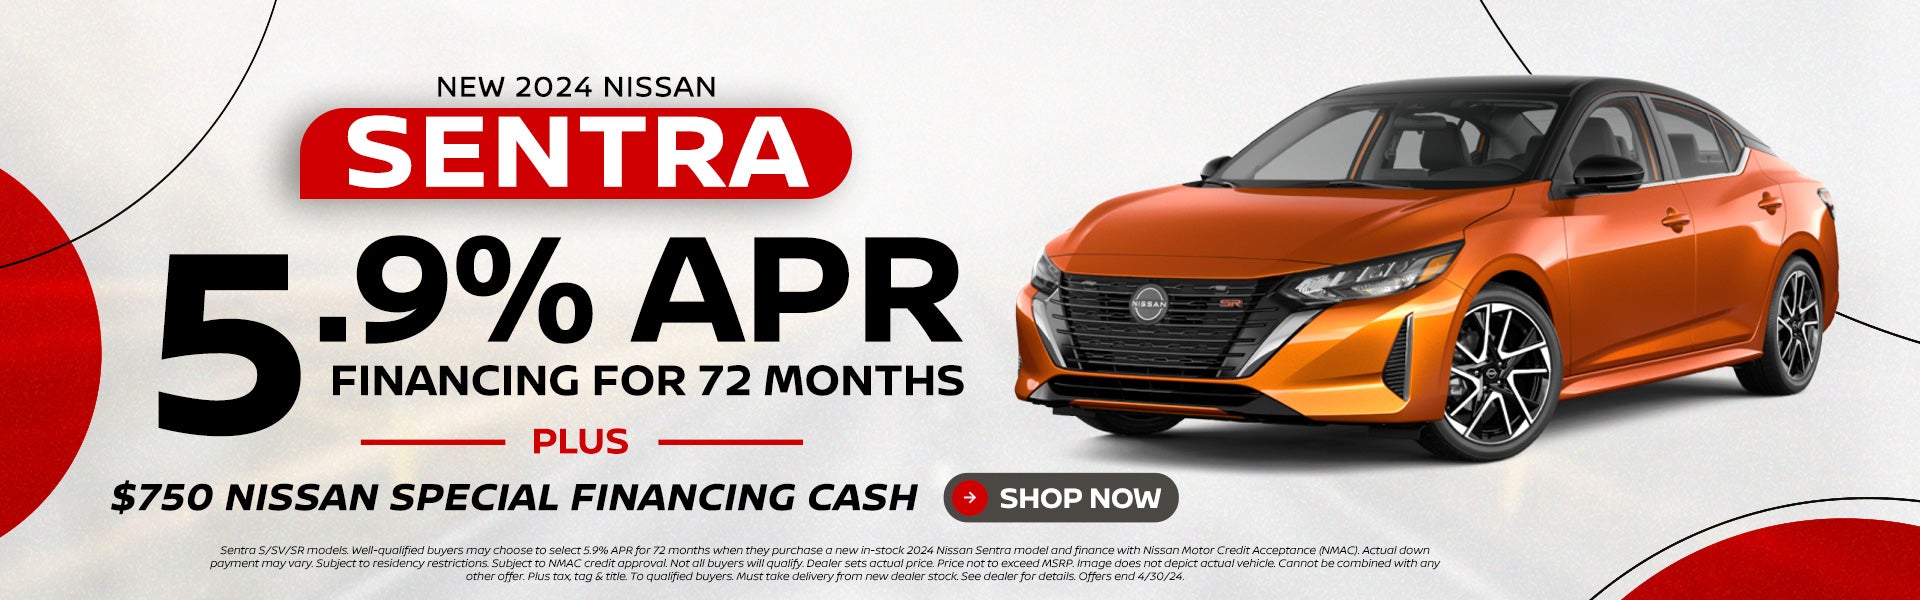 2024 Sentra 5.9% with $750 Nissan Special Financing Cash